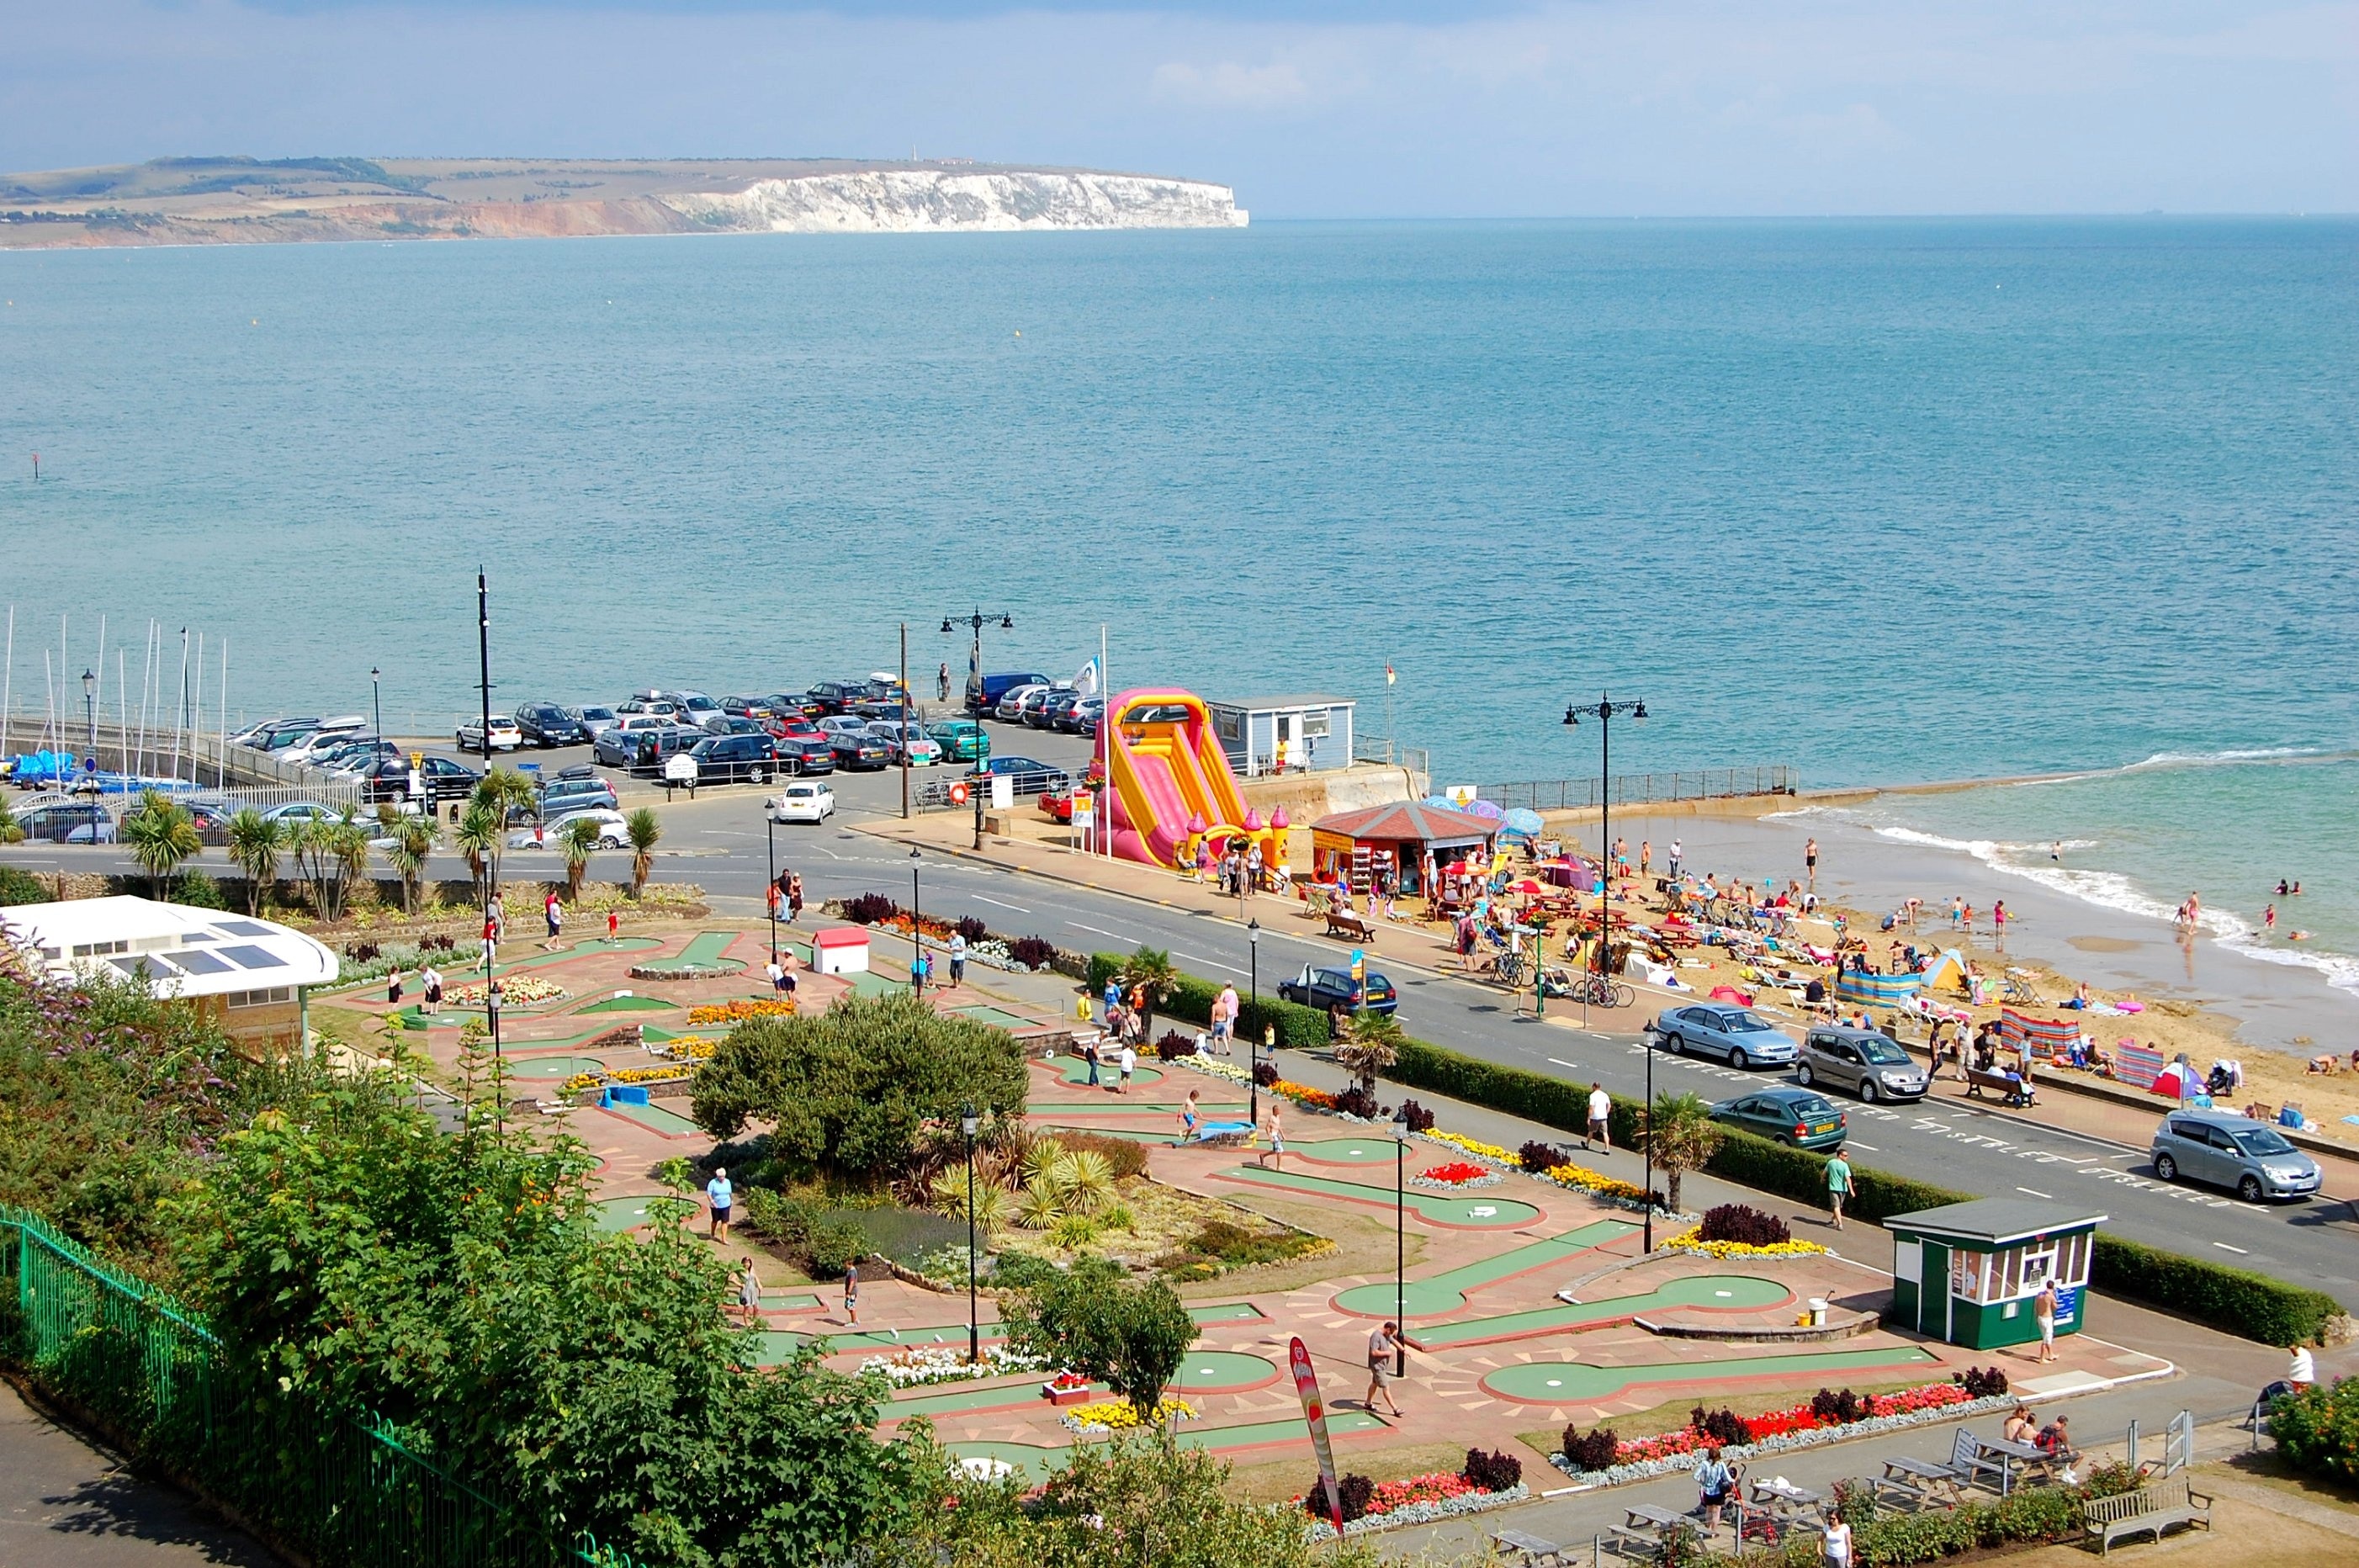 Taken in one of the traditional seaside resorts on the Isle of Wight. UK. Shanklin is a popular seaside resort and civil parish[1] on the Isle of Wight, England, located on the east coast's Sandown Bay. The sandy beach, its Old Village and a wooded ravine, Shanklin Chine, are its main attractions. The esplanade along the beach is occupied by hotels and restaurants for the most part, and is one of the most tourist-oriented parts of the town. The other is the Old Village, at the top of Shanklin Chine. Beaches & Esplanade Shanklin has two beaches; 'Small Hope Beach' and 'Hope Beach.' Small Hope Beach eventually meets Sandown Beach and has many beach huts available for hire, and a small cafe. Hope Beach stretches in the opposite direction. Above Hope Beach is the esplanade which boasts some traditional seaside attractions including an amusement arcade, a crazy golf course, and a children's play area, with slides, ball pools, bouncy castles, rigging, swings etc available to be hired for a childs birthday party. There are several seafront hotels, a cliff lift from the seafront to the top of the cliff, a putting course, several cafes and restaurants and pubs, and a large, clean beach. Shanklin used to have a pier, but this was destroyed in the Great Storm of 1987. The pier formerly had a theatre at which many famous performers appeared, including Paul Robeson, Richard Tauber and Arthur Askey (whose daughter attended a local boarding school called Upper Chine School for Girls). The Summerland Amusement Arcade on the seafront was formerly a seaplane hangar positioned at Bembridge where it housed Fairey Campania seaplanes of the Nizam of Hyderabad's Squadron. Much of the seafront was cleared in World War Two bombing. Shanklin Sailing Club is situated at the North end of the Esplanade. Founded in 1931 as 'Shanklin Amateur Sailing Club', the club has a fleet of Sprint 15 catamarans and holds races three days a week during the season.[6] Further along the beach is the Fisherman's Cottage pub. This is at the bottom of Shanklin Chine[7], from which the town takes its name, historically "Chynklyng Chine" and in the Domesday Book of 1086 Sencliz (held by William FitzAzor; Jocelyn FitzAzor) from "Scen-hlinc" [8][9]. The Chine is open to the public for a small fee and continues up to Rylstone Gardens in the Old Village. It contains a small section of the pipe of the "Operation Pluto" pipeline which ran across the Isle of Wight and out from Shanklin and another branch from Sandown to supply fuel to the D-Day beaches